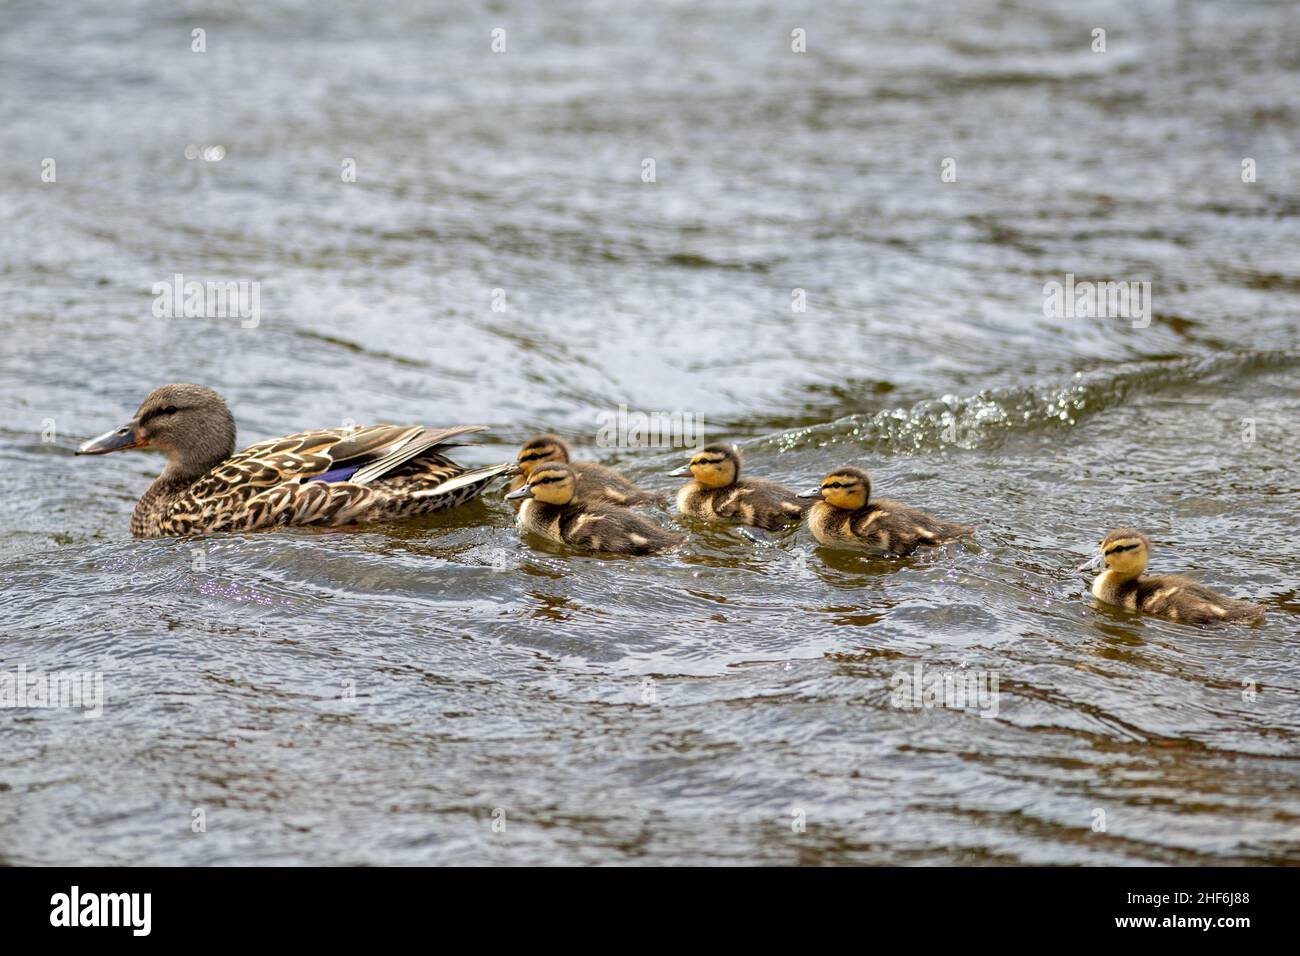 Female mallard duck with her baby ducks swimming on a choppy river. The mallard is a large duck with a hefty body, rounded head, and wide, flat bill. Stock Photo